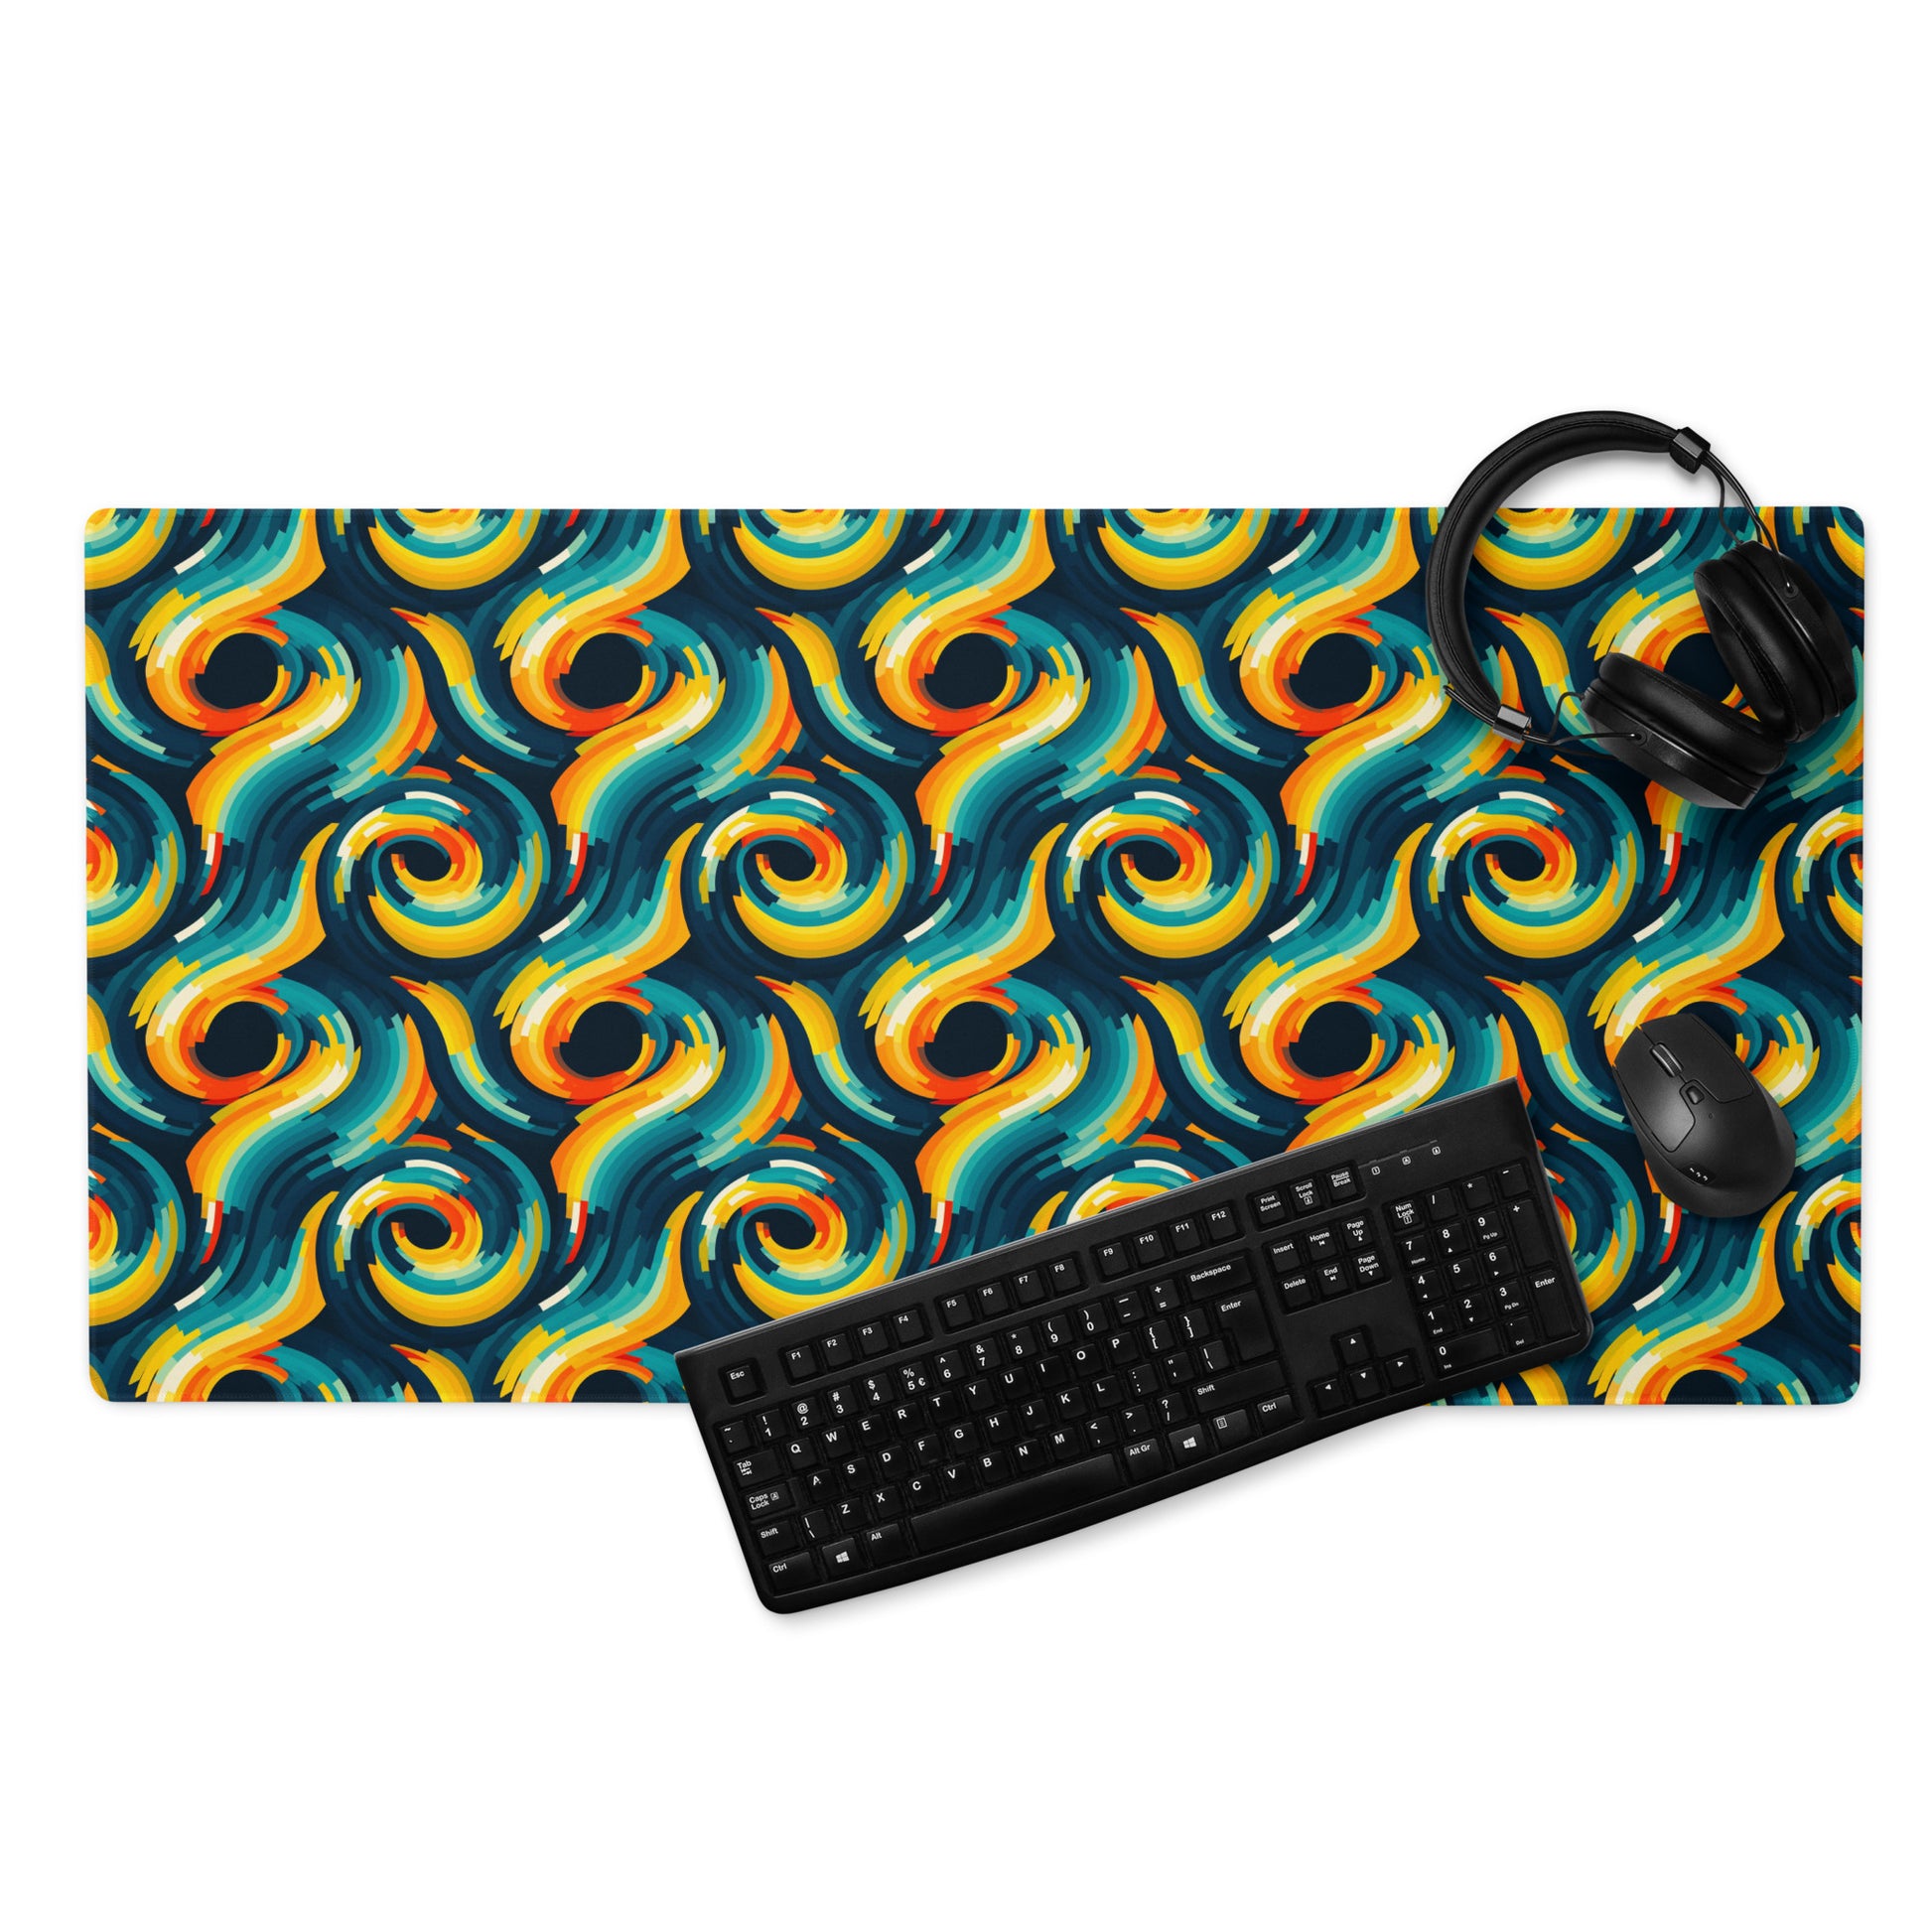  A 36" x 18" desk pad with swirls all over it displayed with a keyboard, headphones and a mouse. Yellow and Blue in color.